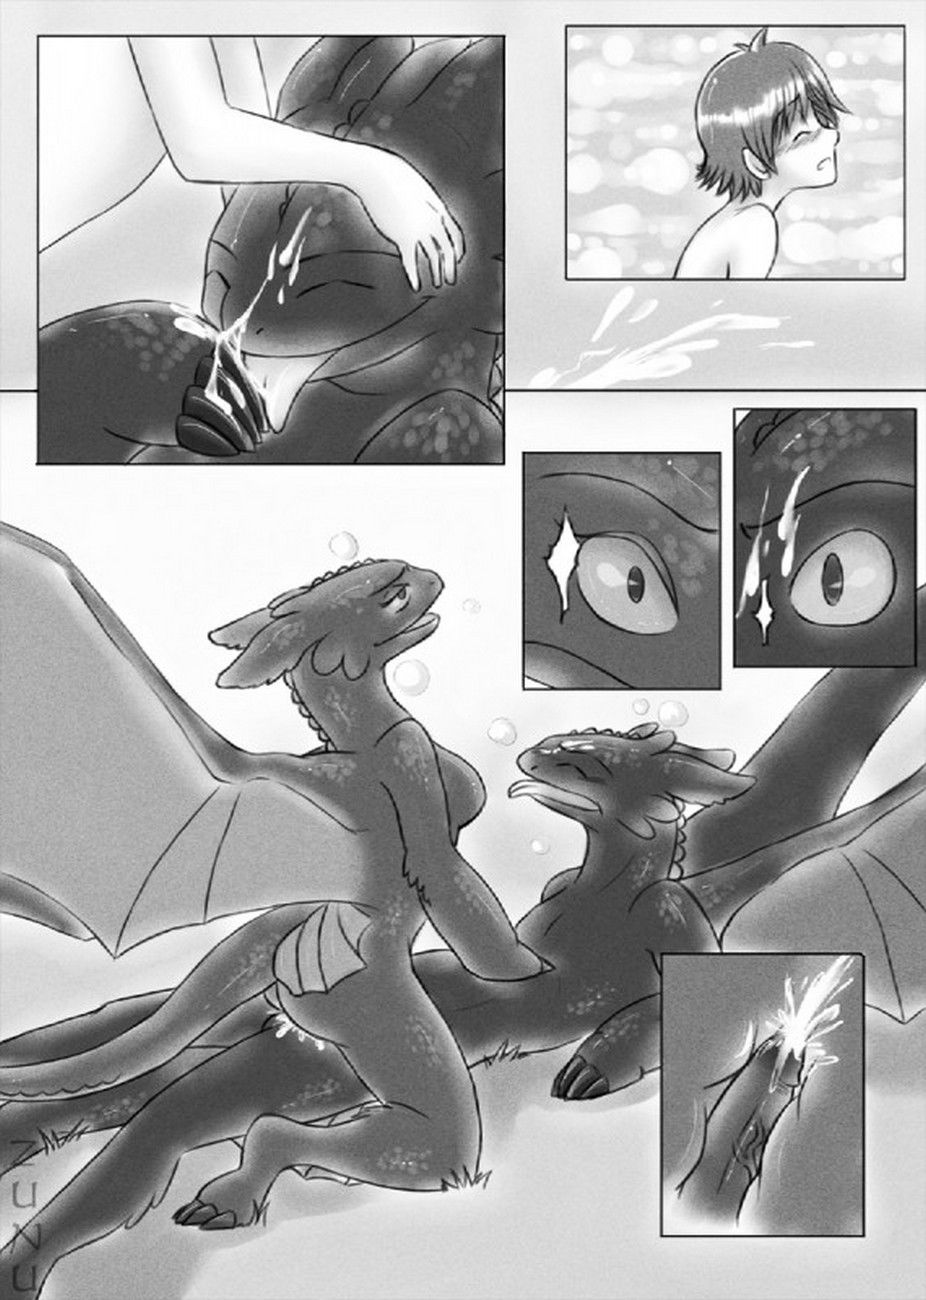 How To Satisfy Your Dragon page 7